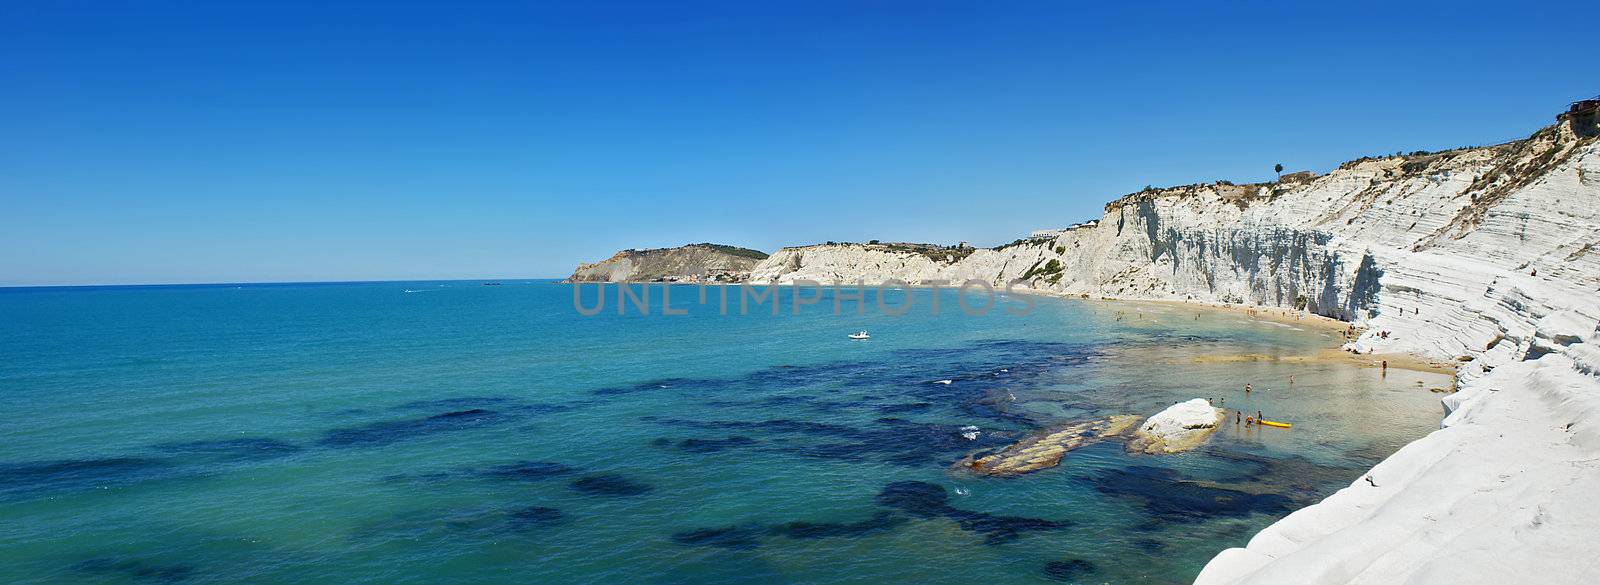 Landscape of "Scala dei Turchi" (Stair of the Turks) in the province of Agrigento (Sicily). This is a rocky cliff on the coast of Realmonte, near Porto Empedocle, southern Sicily, Italy. It has become a tourist attraction due to its unusual white colour.The latter part of the name derives from the frequent raids carried on by Turkish and Barbary Coast pirates.